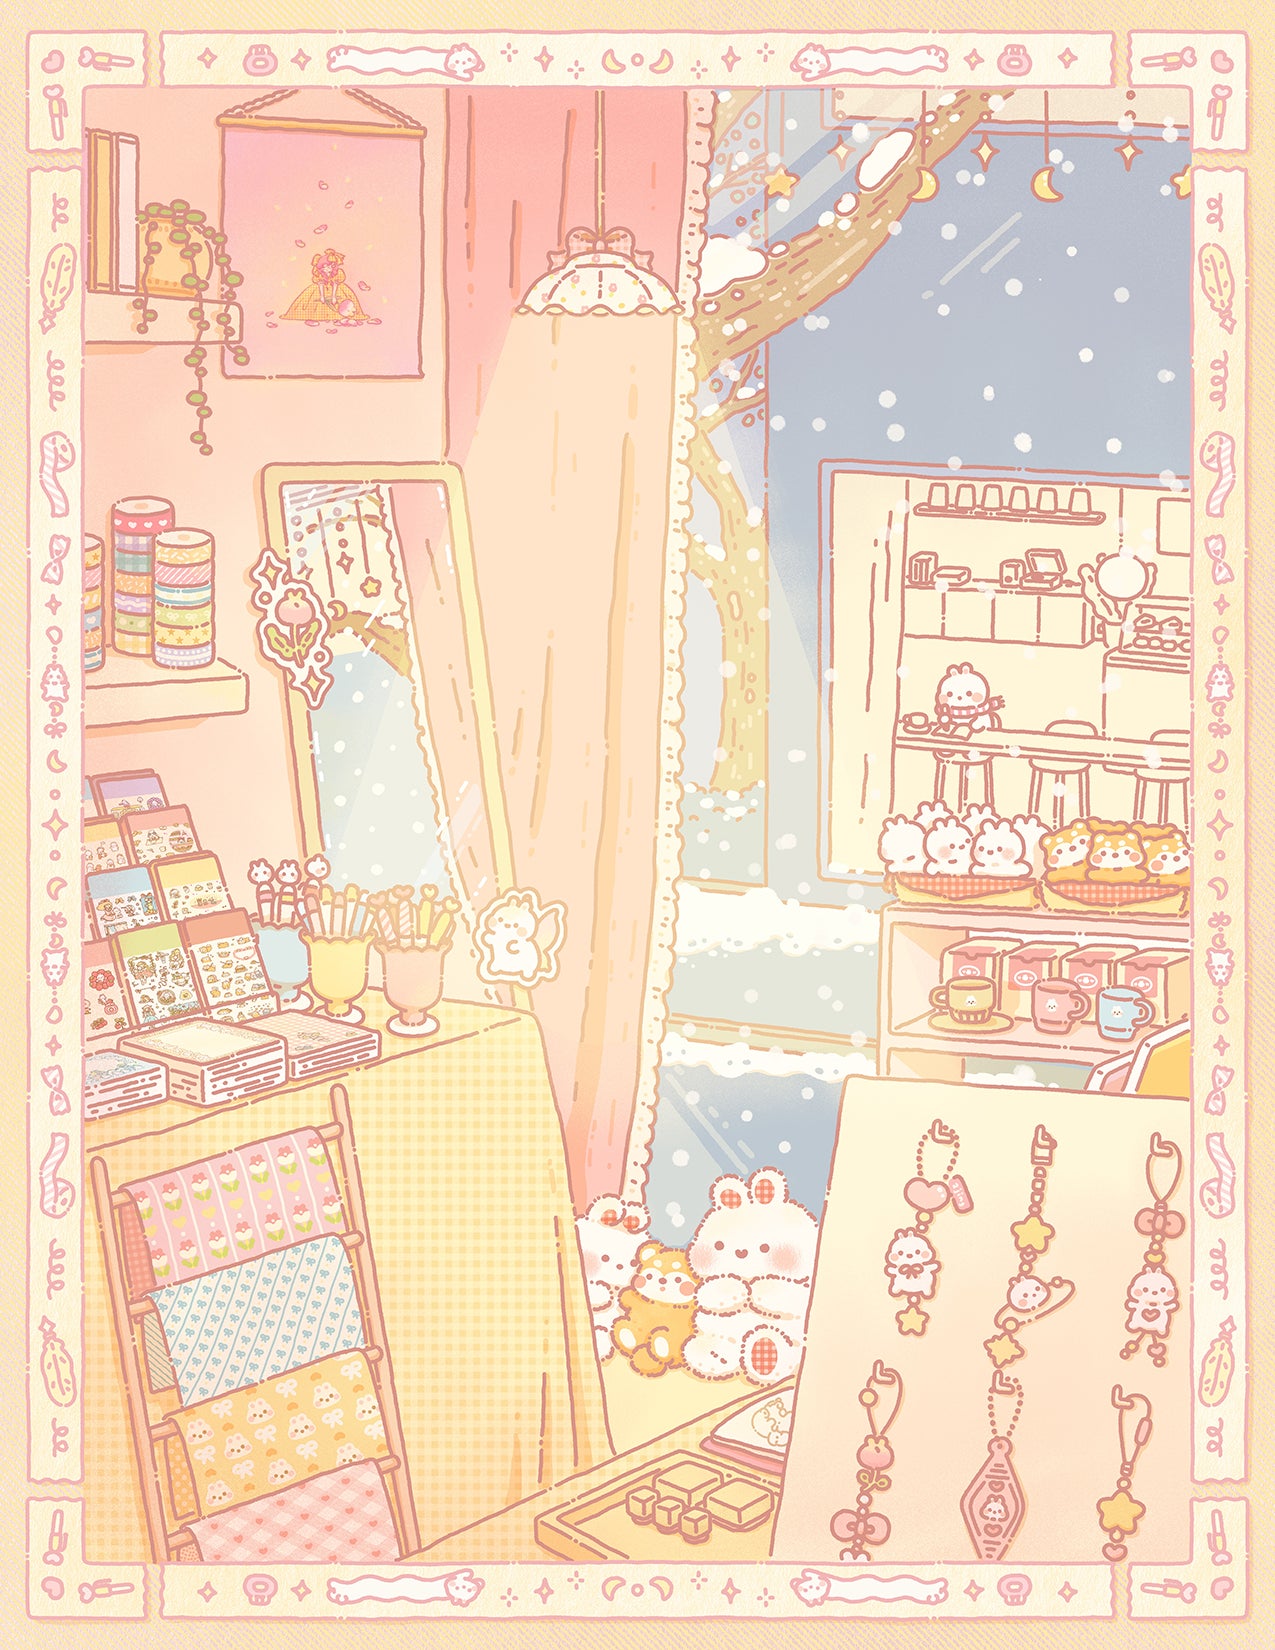 Cozy Stationery Shop Art Print by 2jingis2jing (8.5 x 11 inches)